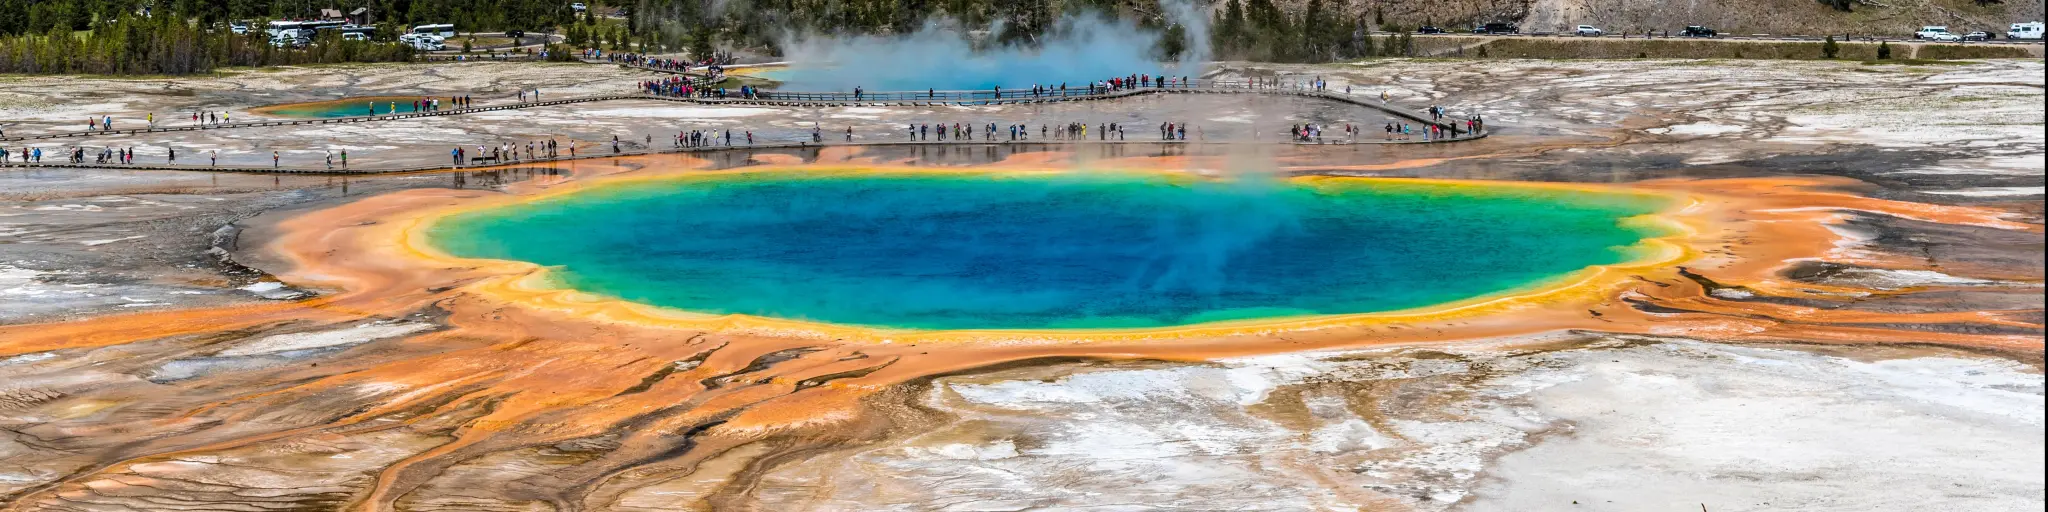 Grand Prismatic Springs and geyser basin landscape at Yellowstone National Park.